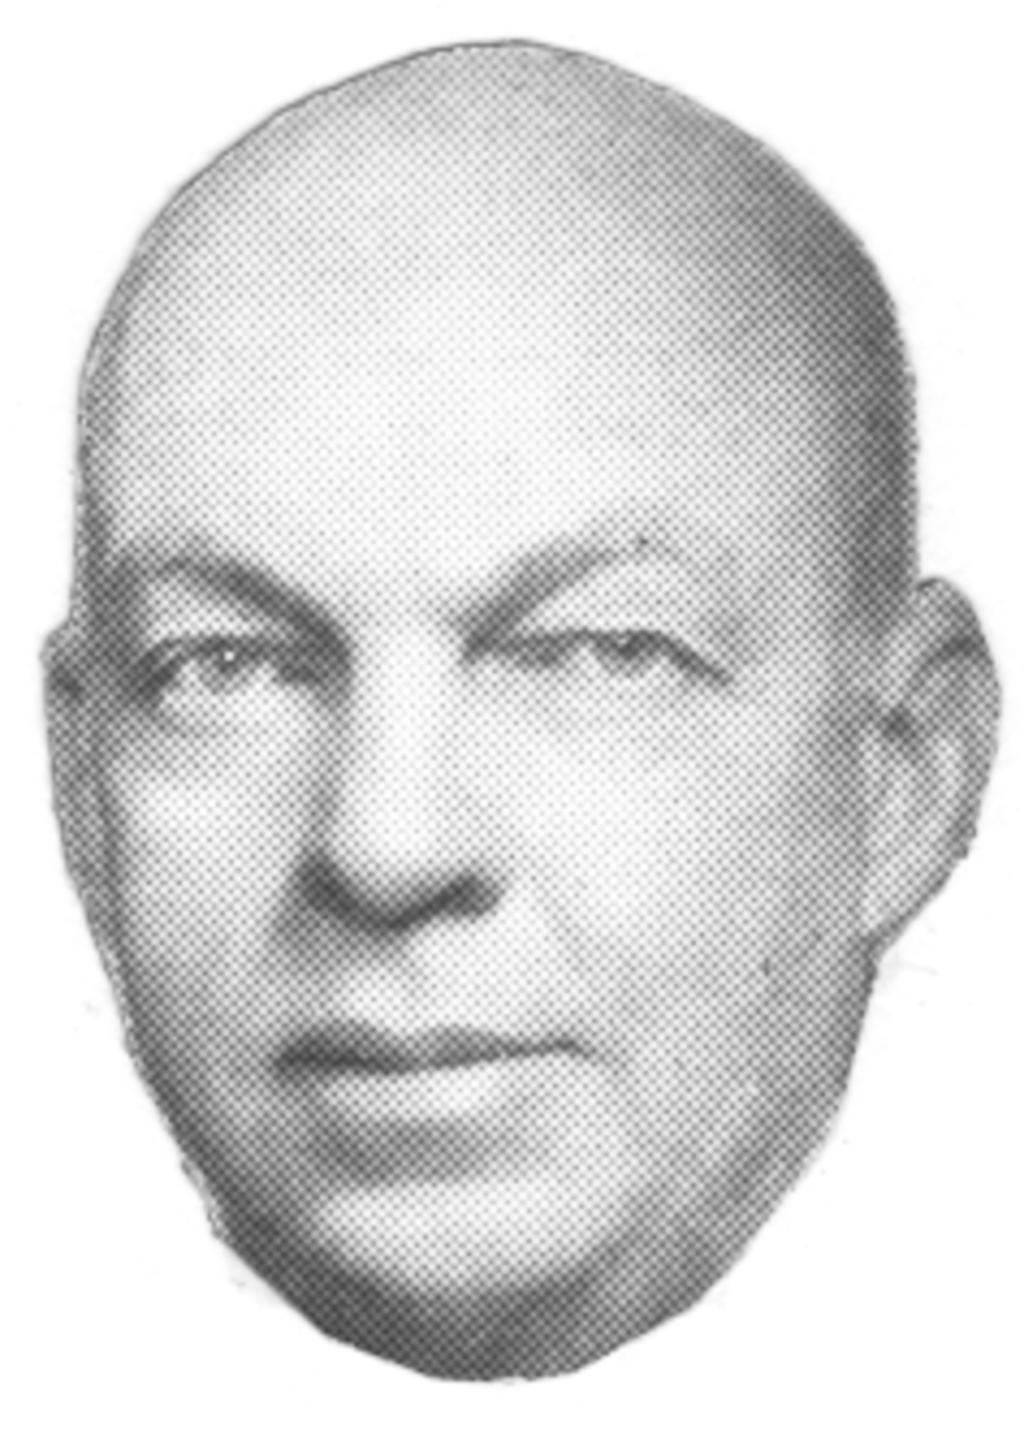 The face of Edwin H. Armstrong